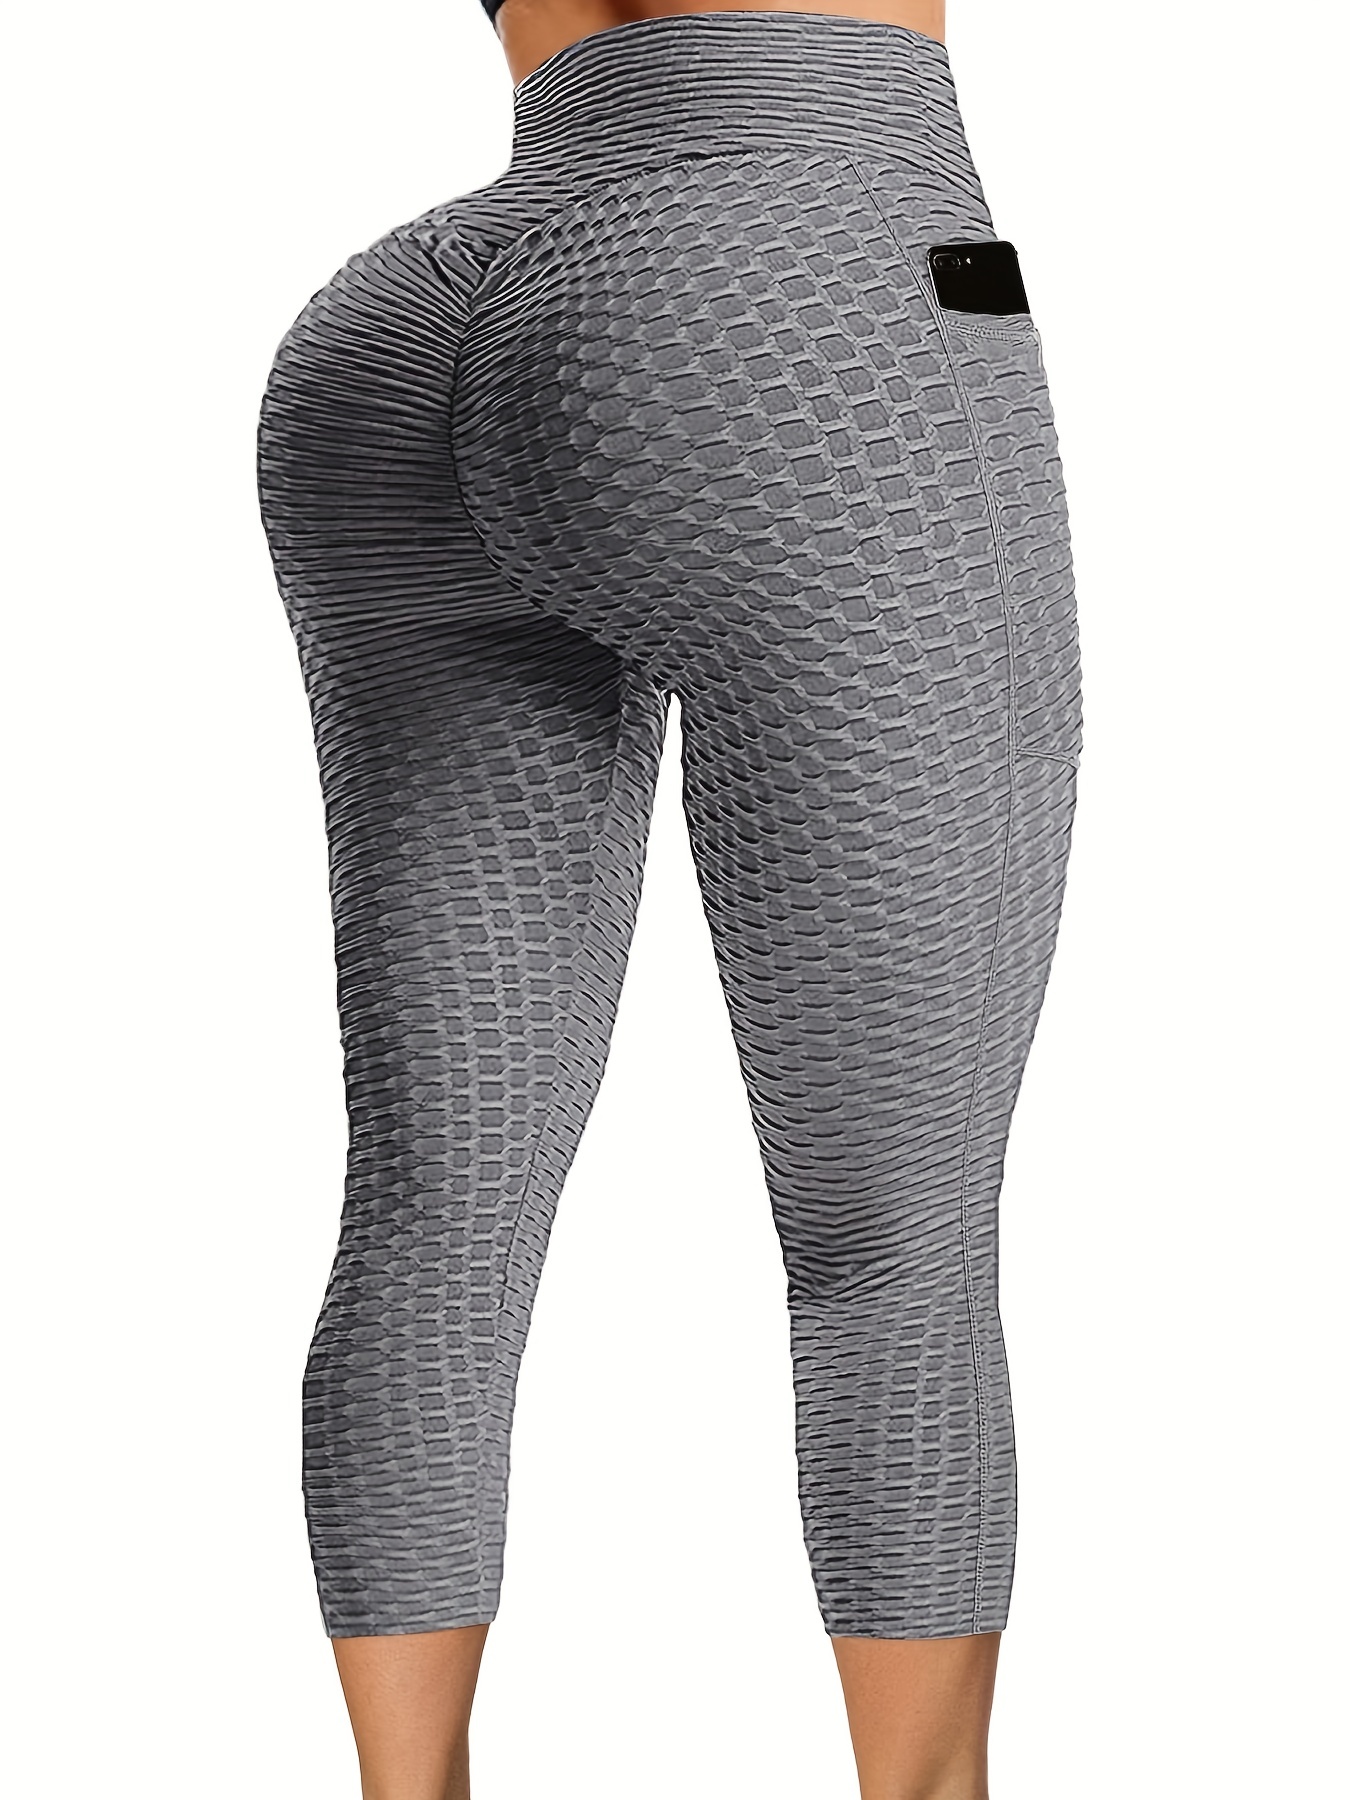 Womens High Waisted Ruched Yoga Pants Tummy Control Scrunched Booty Leggings  Workout Running Butt Lift Textured Tights 